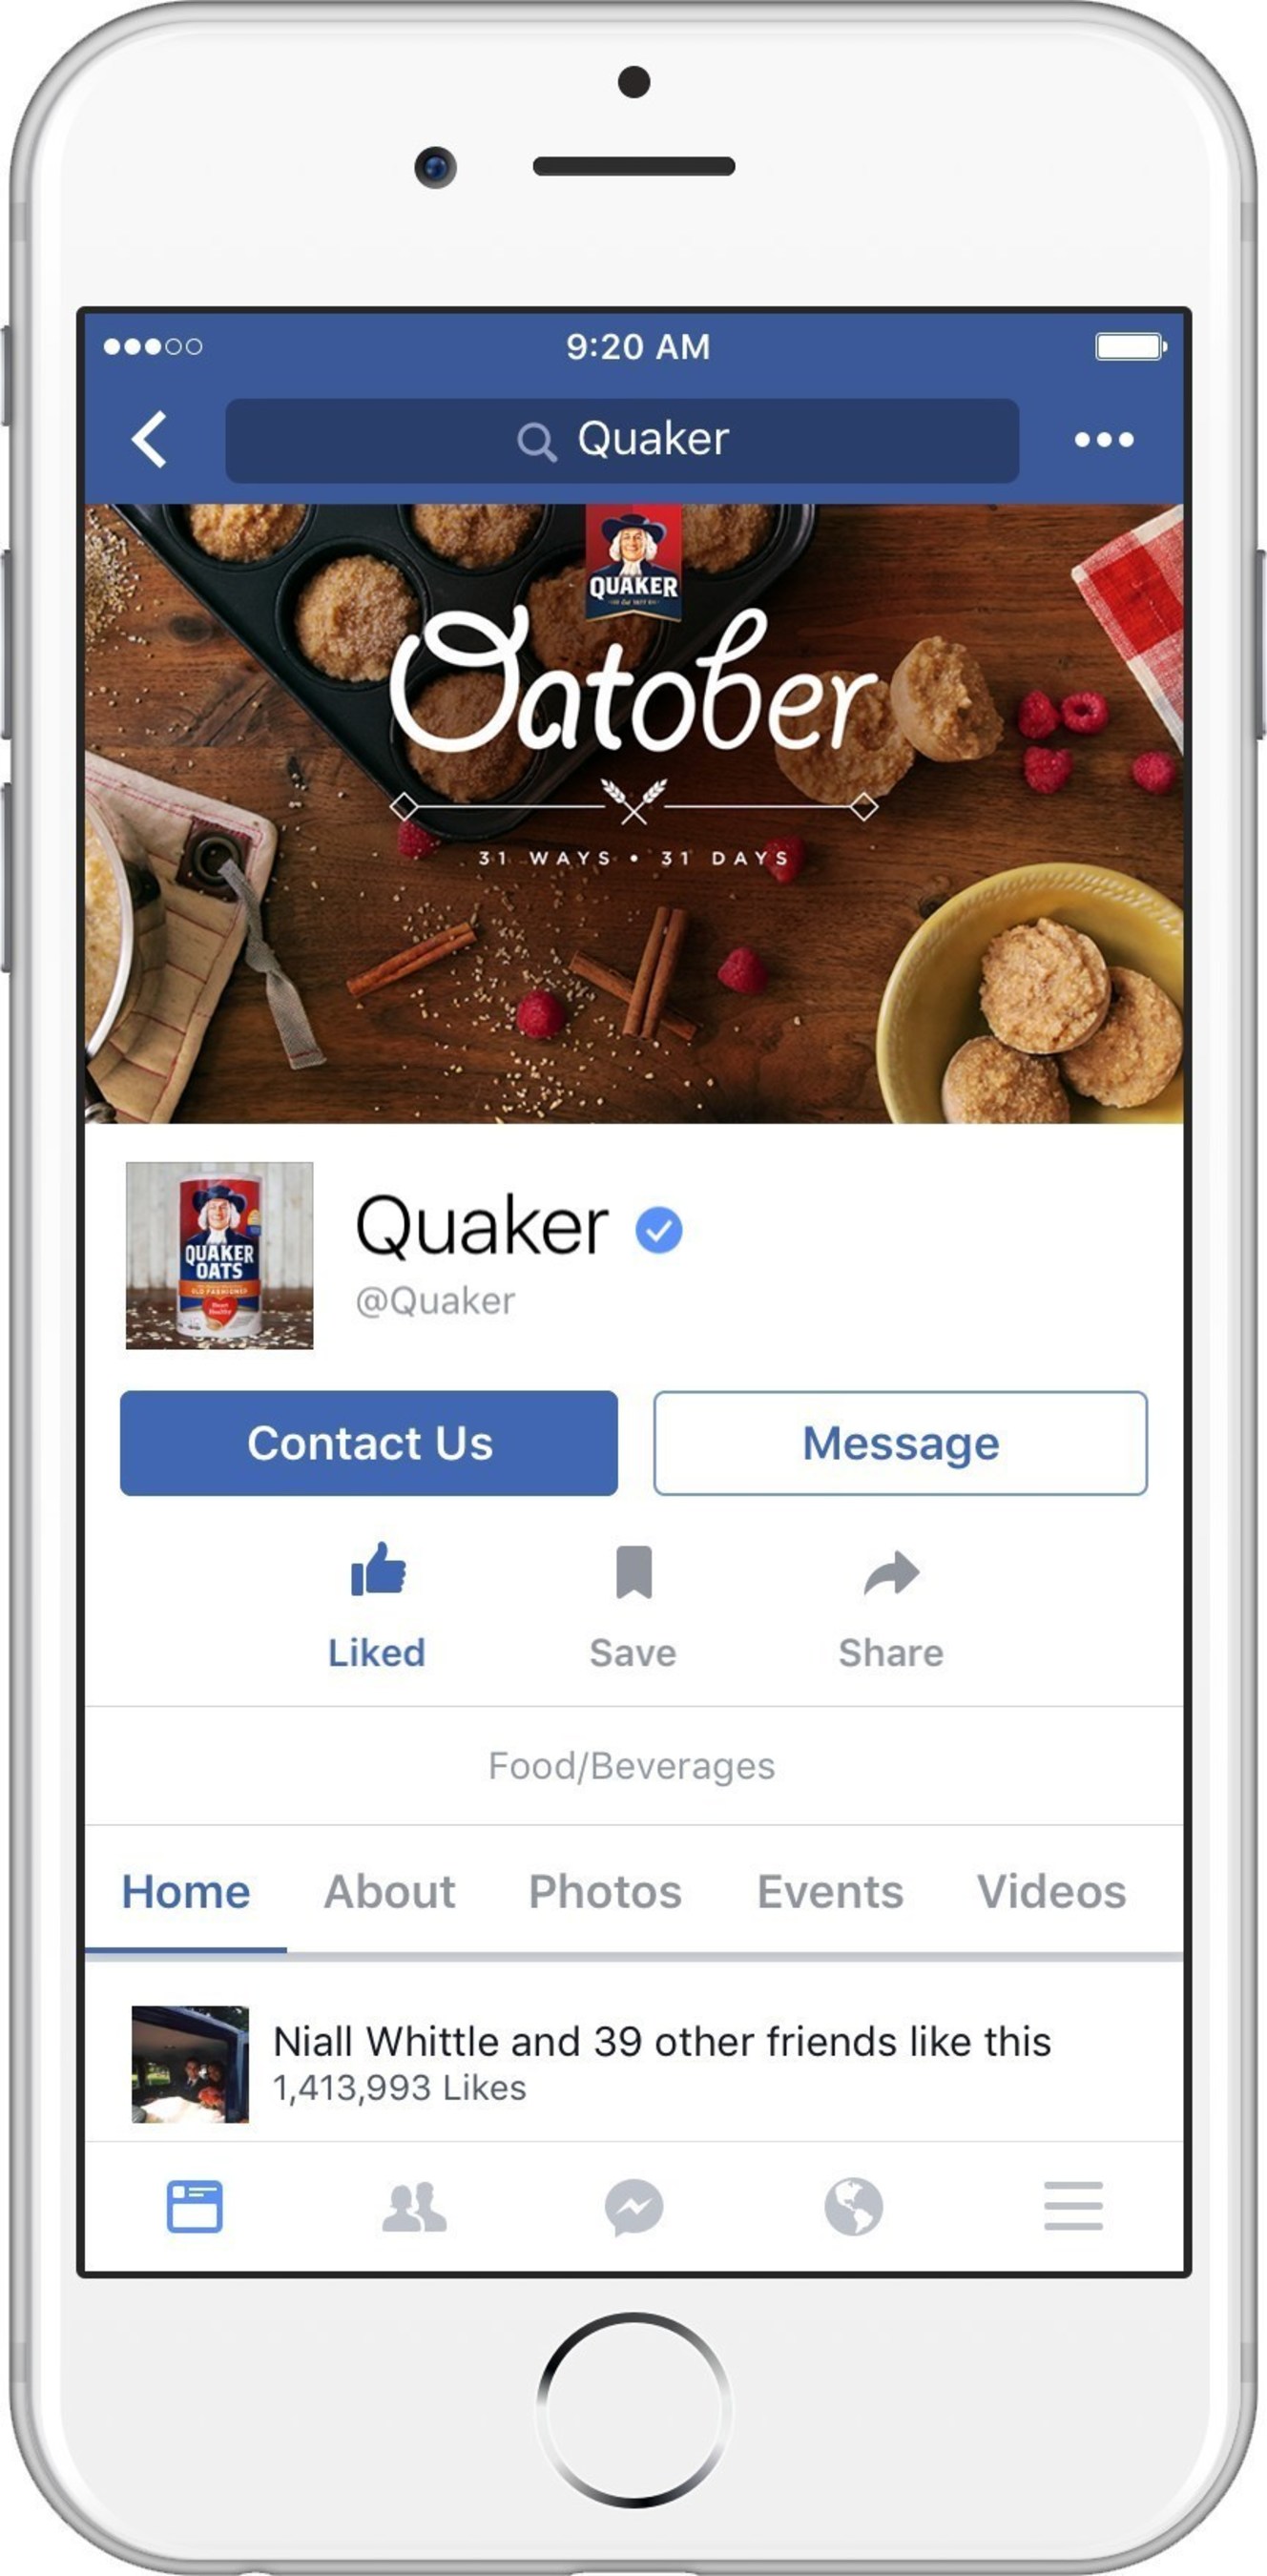 With oatmeal season officially underway, The Quaker Oats Company, a subsidiary of PepsiCo, Inc., is launching a campaign, aptly called 'Oatober,' to celebrate the goodness and versatility of oats.